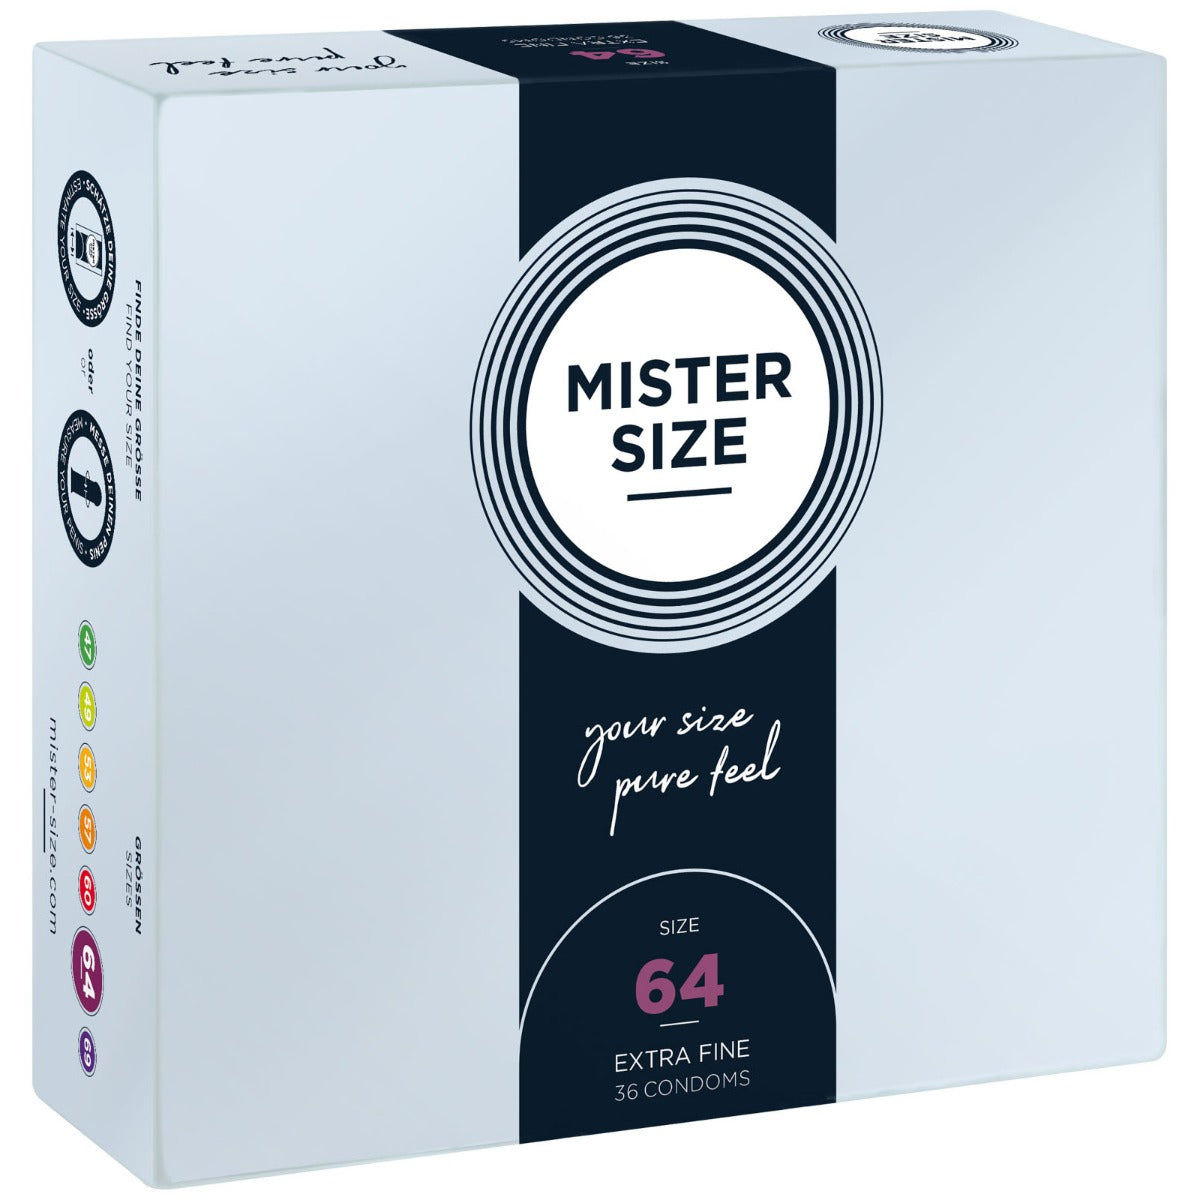 Condoms MISTER SIZE - pure feel Condoms - Size 64 mm (36 pack)   